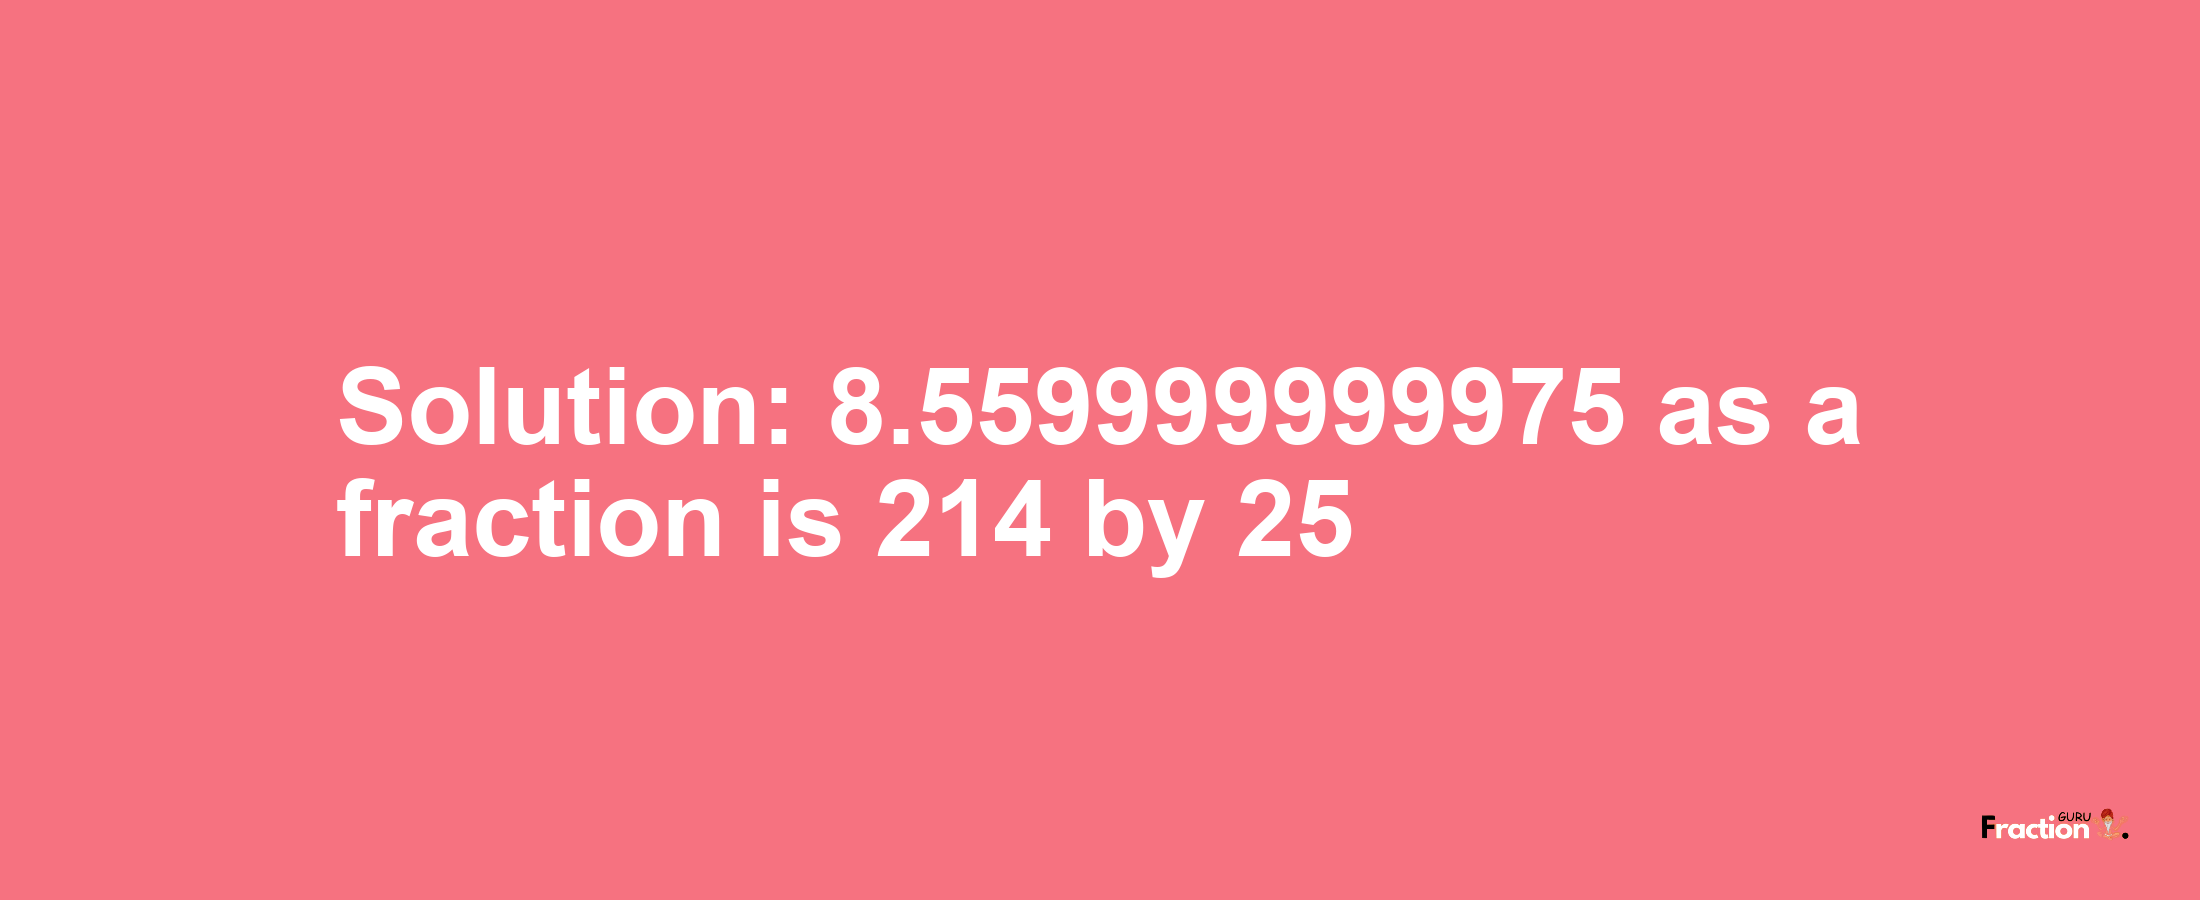 Solution:8.559999999975 as a fraction is 214/25